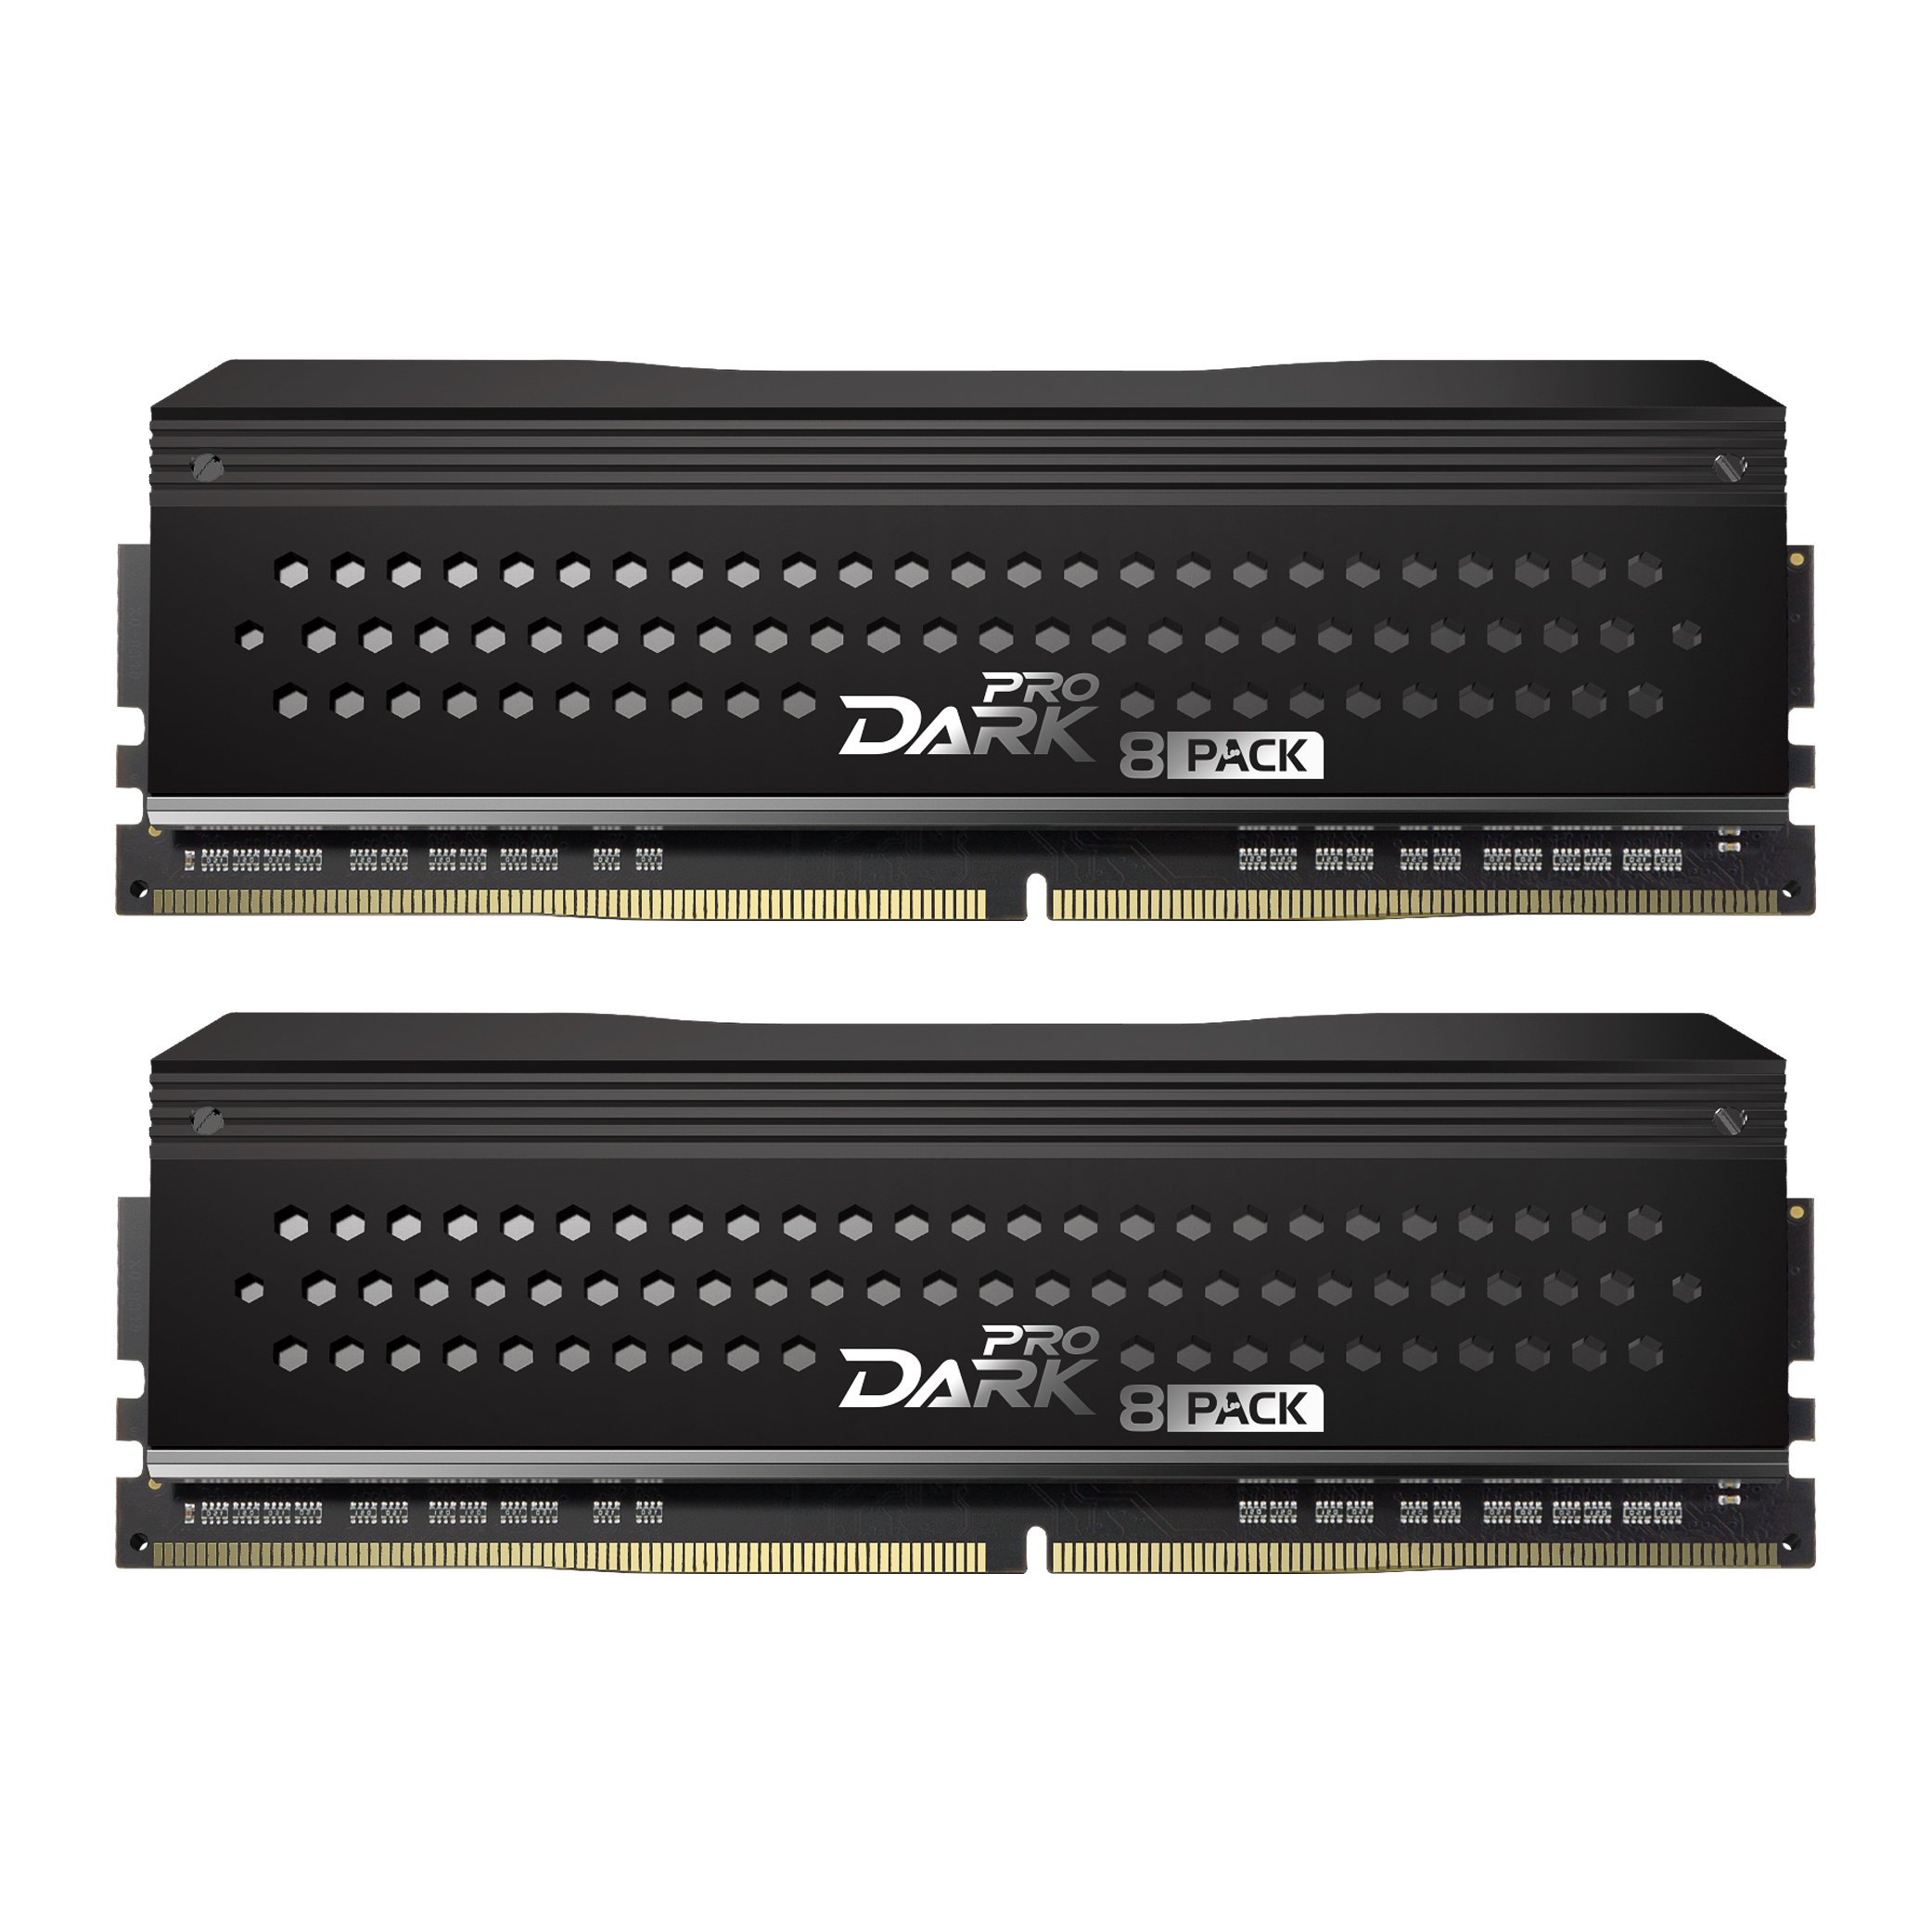 Team Group 8Pack RIPPED Edition 16GB (2x8GB) DDR4 PC4-28800C14 3600MHz Dual Channel Kit - Black/